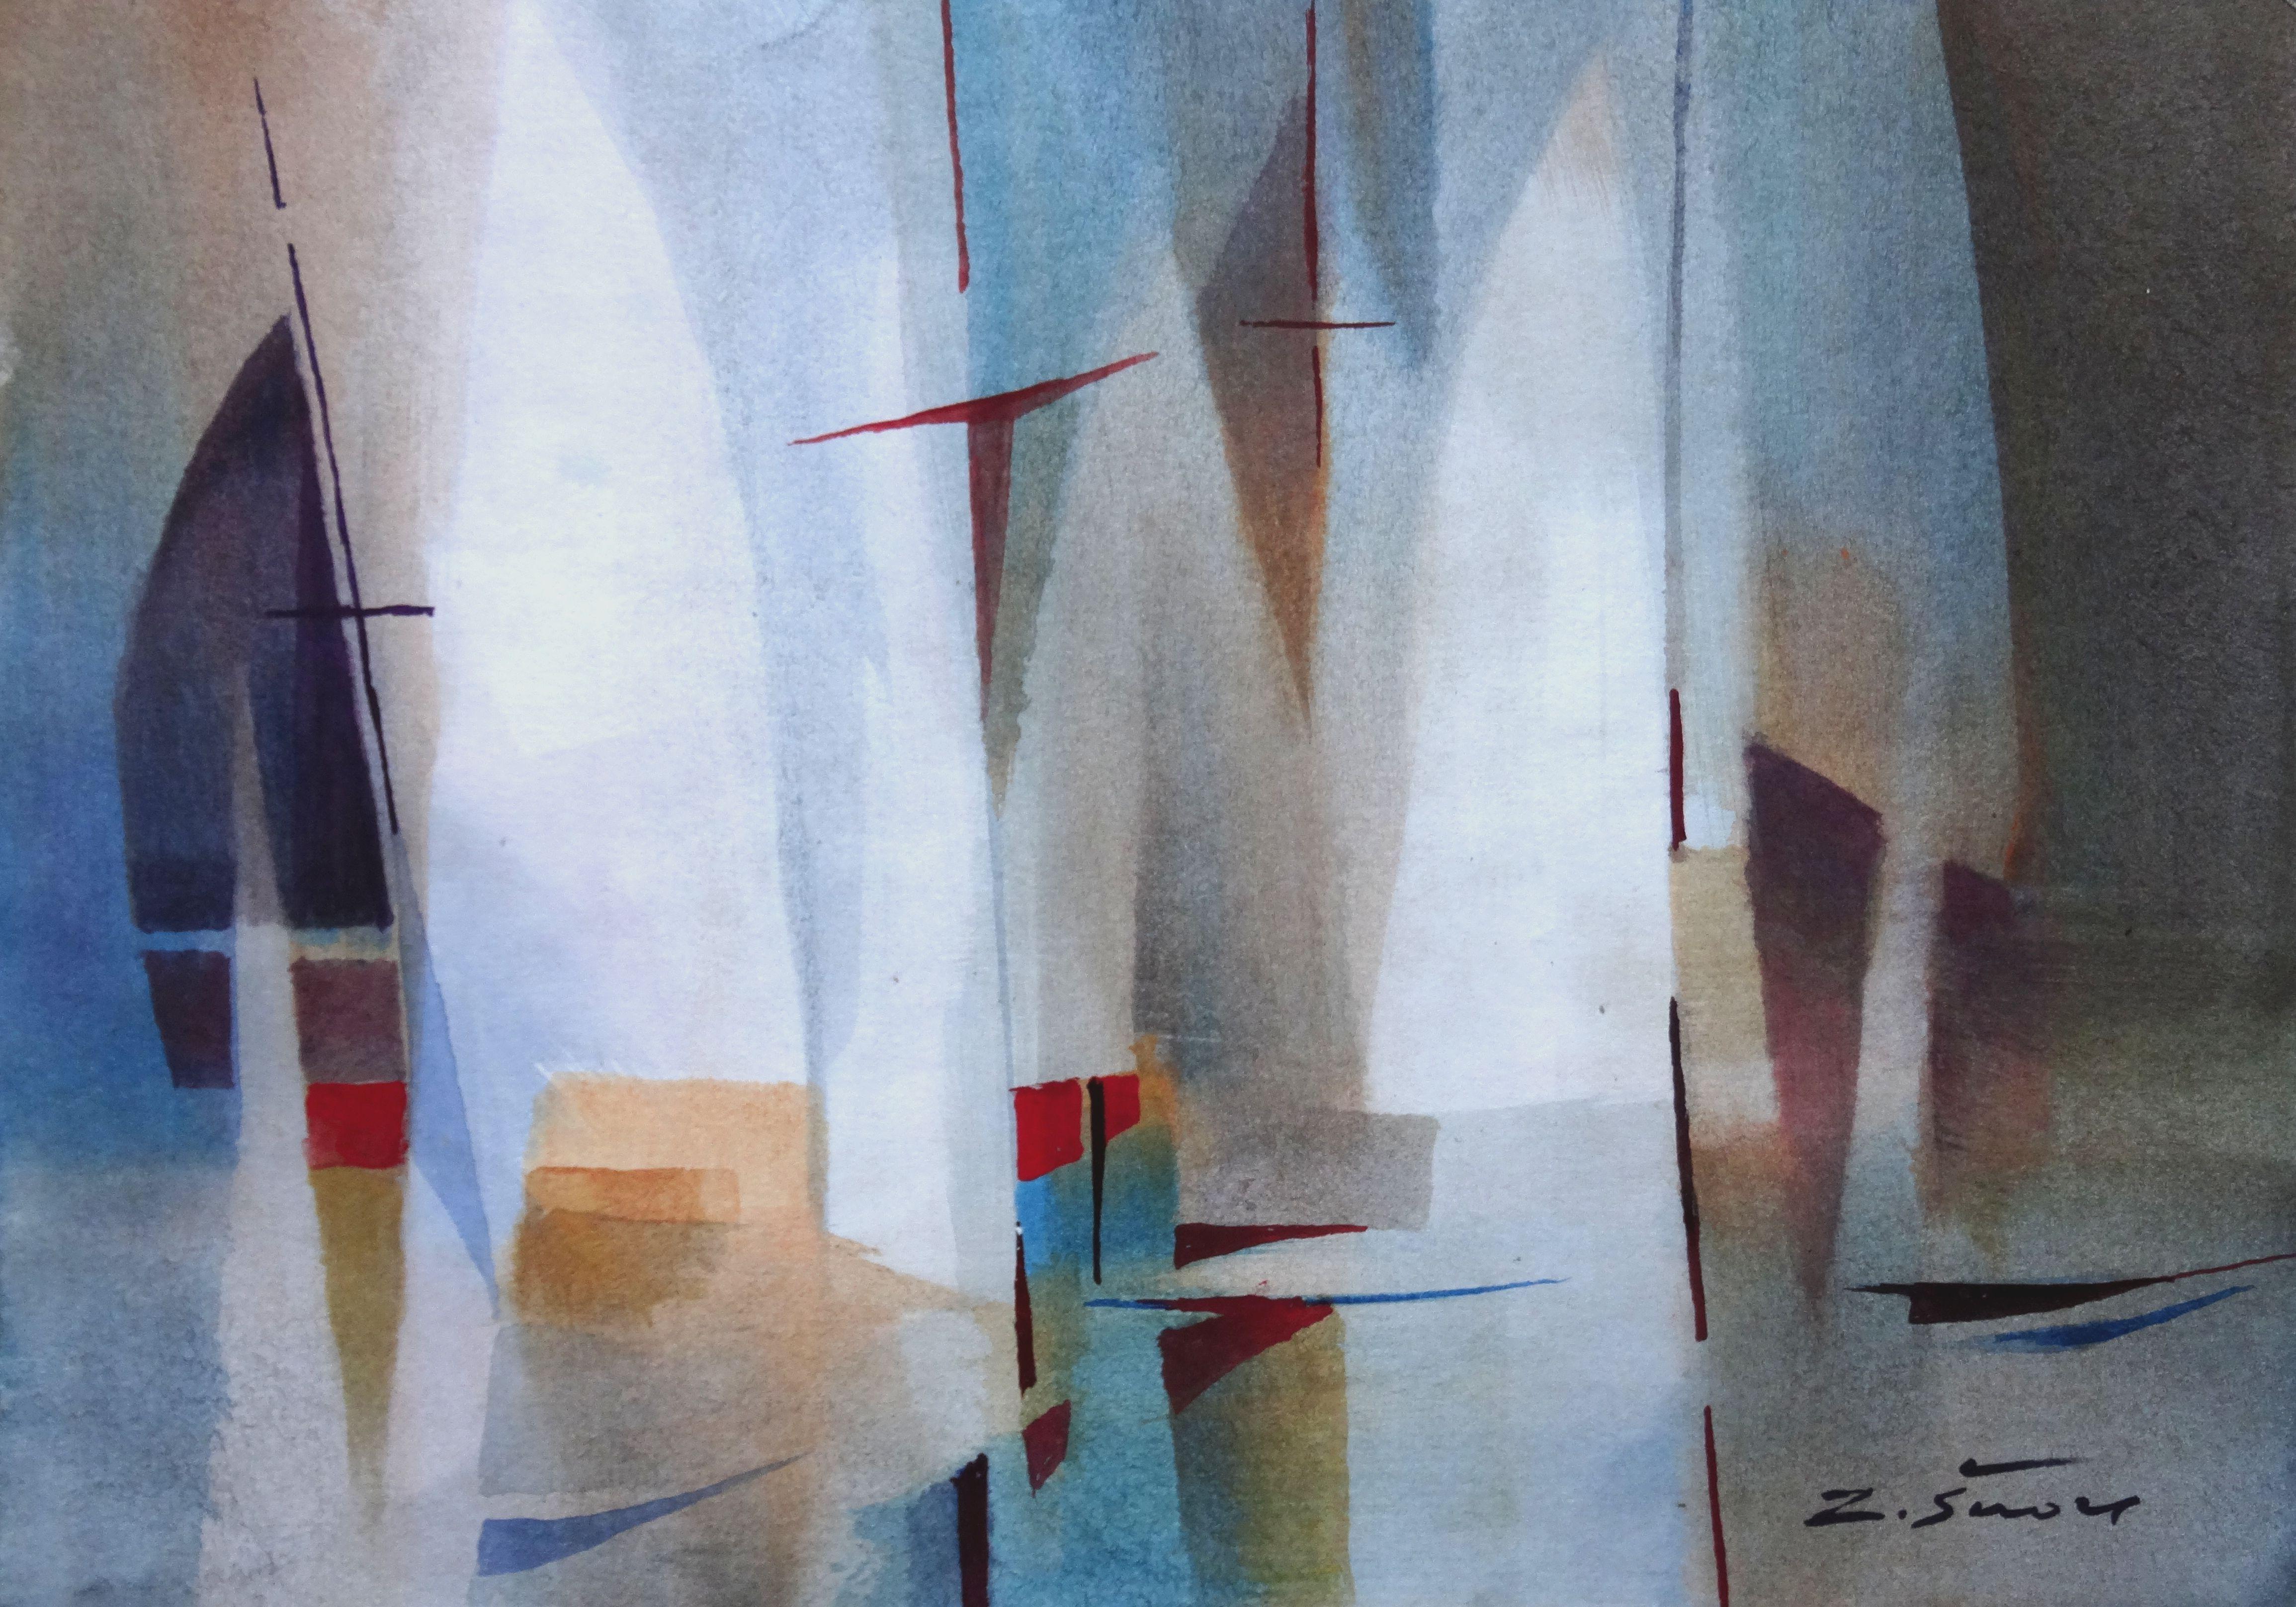 White sailboats. Watercolor on paper, 29.5x41.5 cm